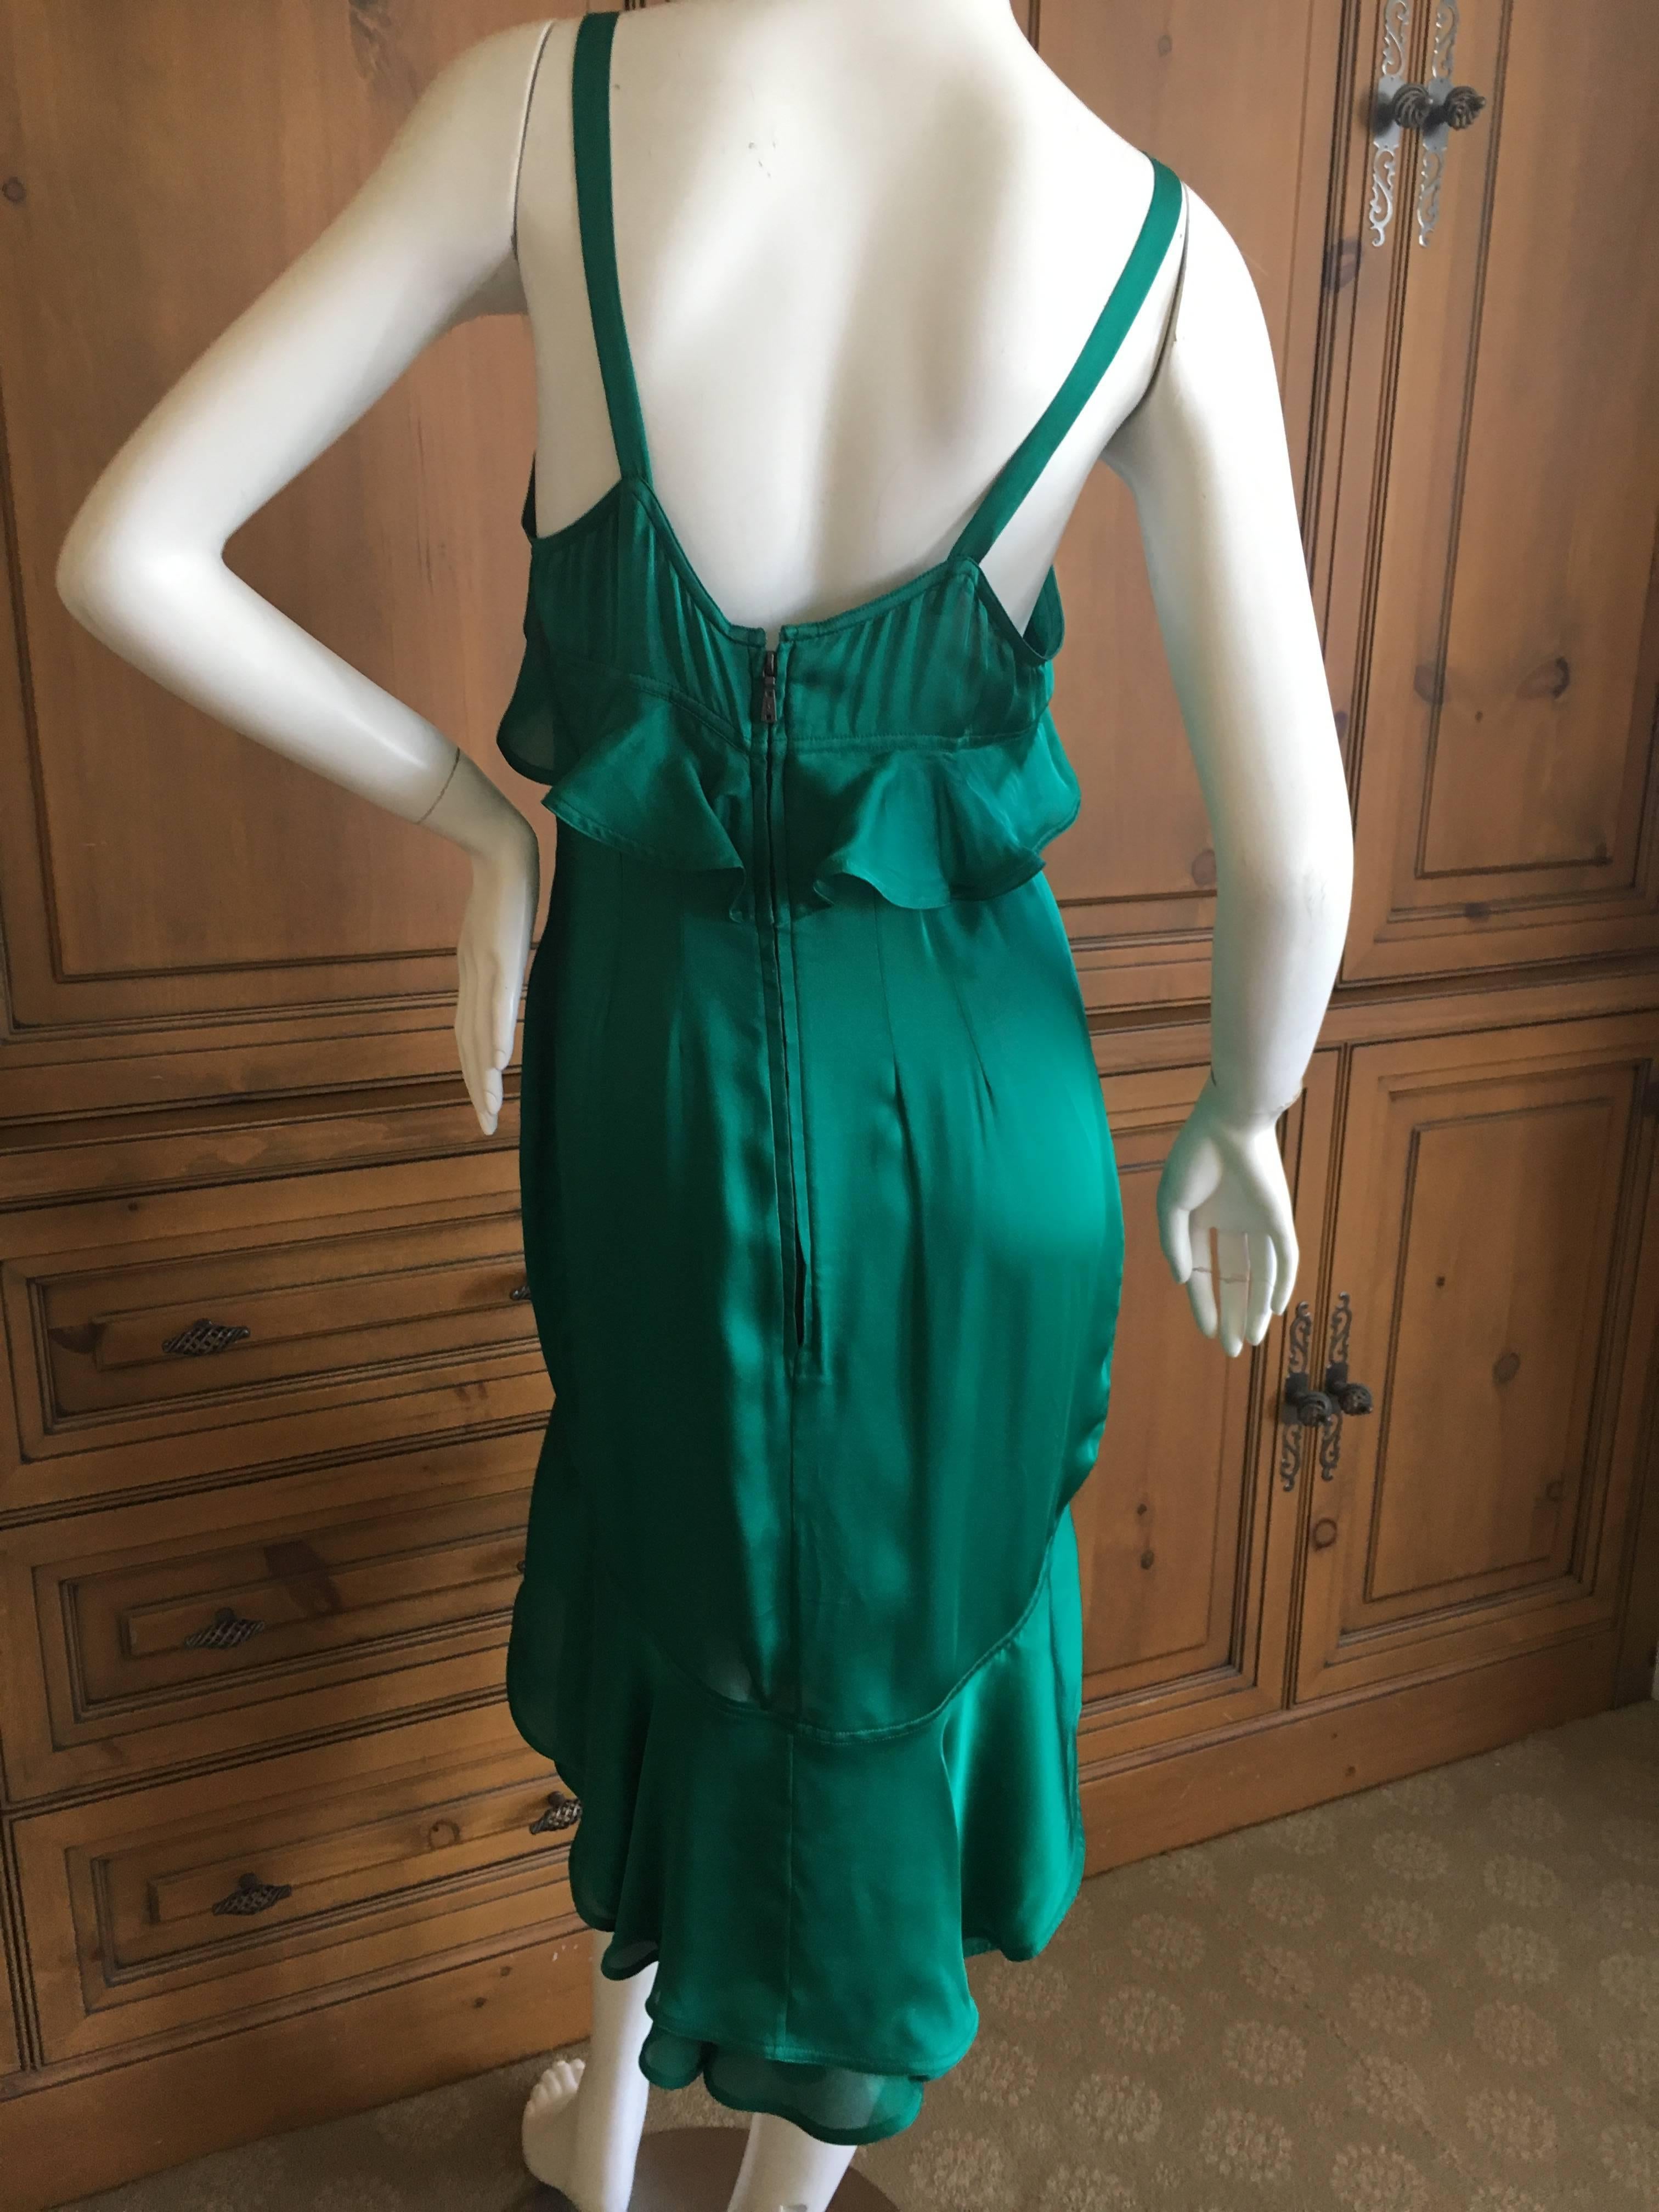 Yves Saint Laurent Tom Ford Fall 2003 Look 1 Green Ruffle Dress For Sale 3